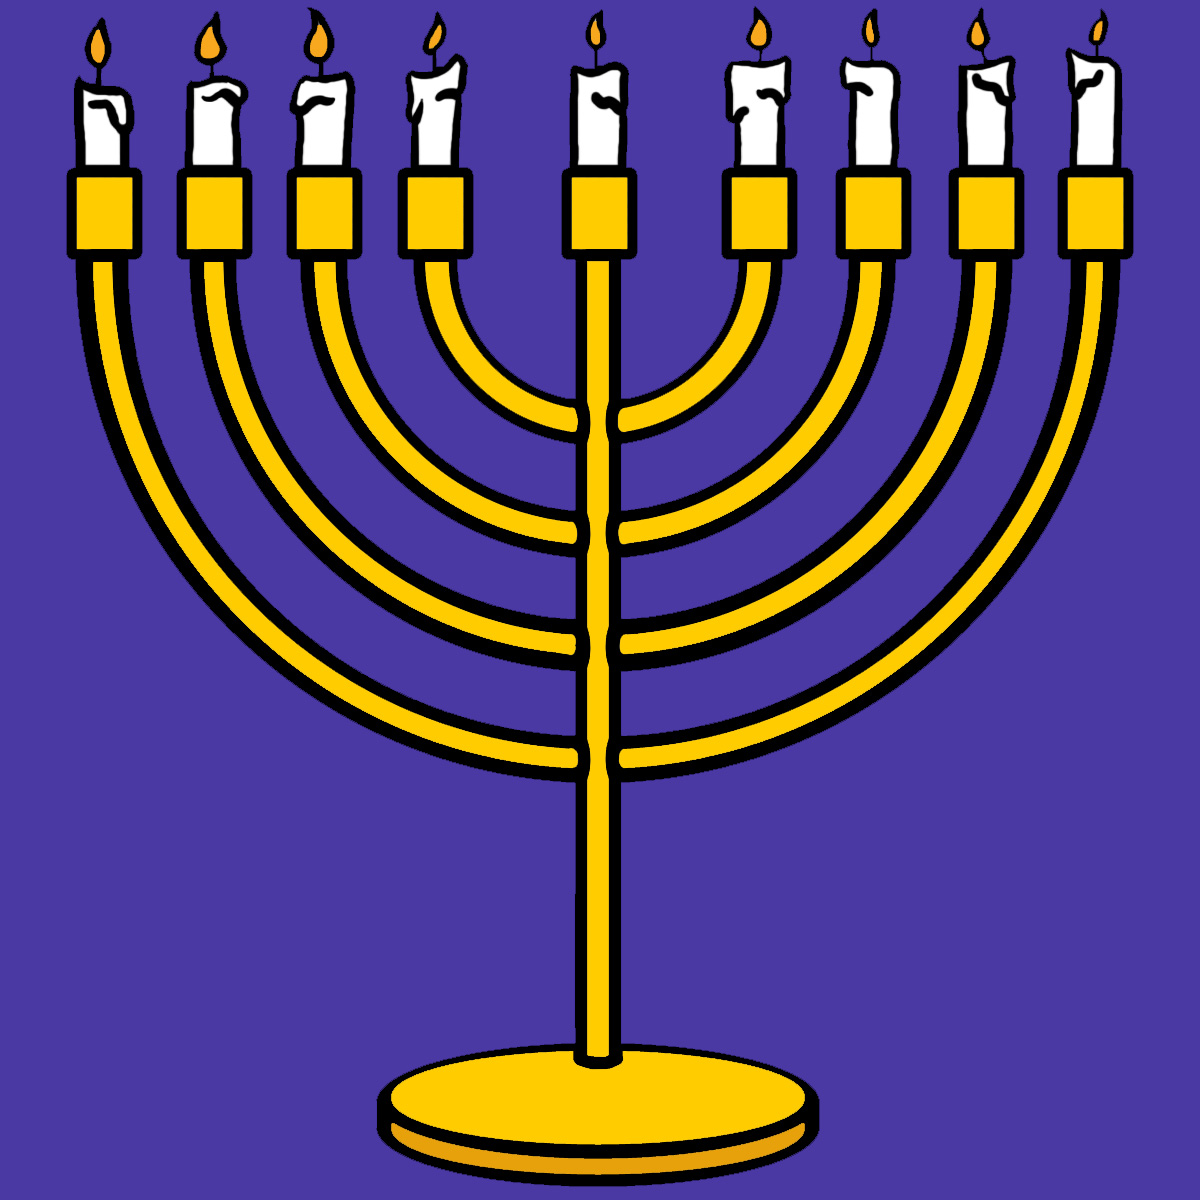 Illustration Can Be Used For The Jewish Holiday Hanukkah Or Chanukah